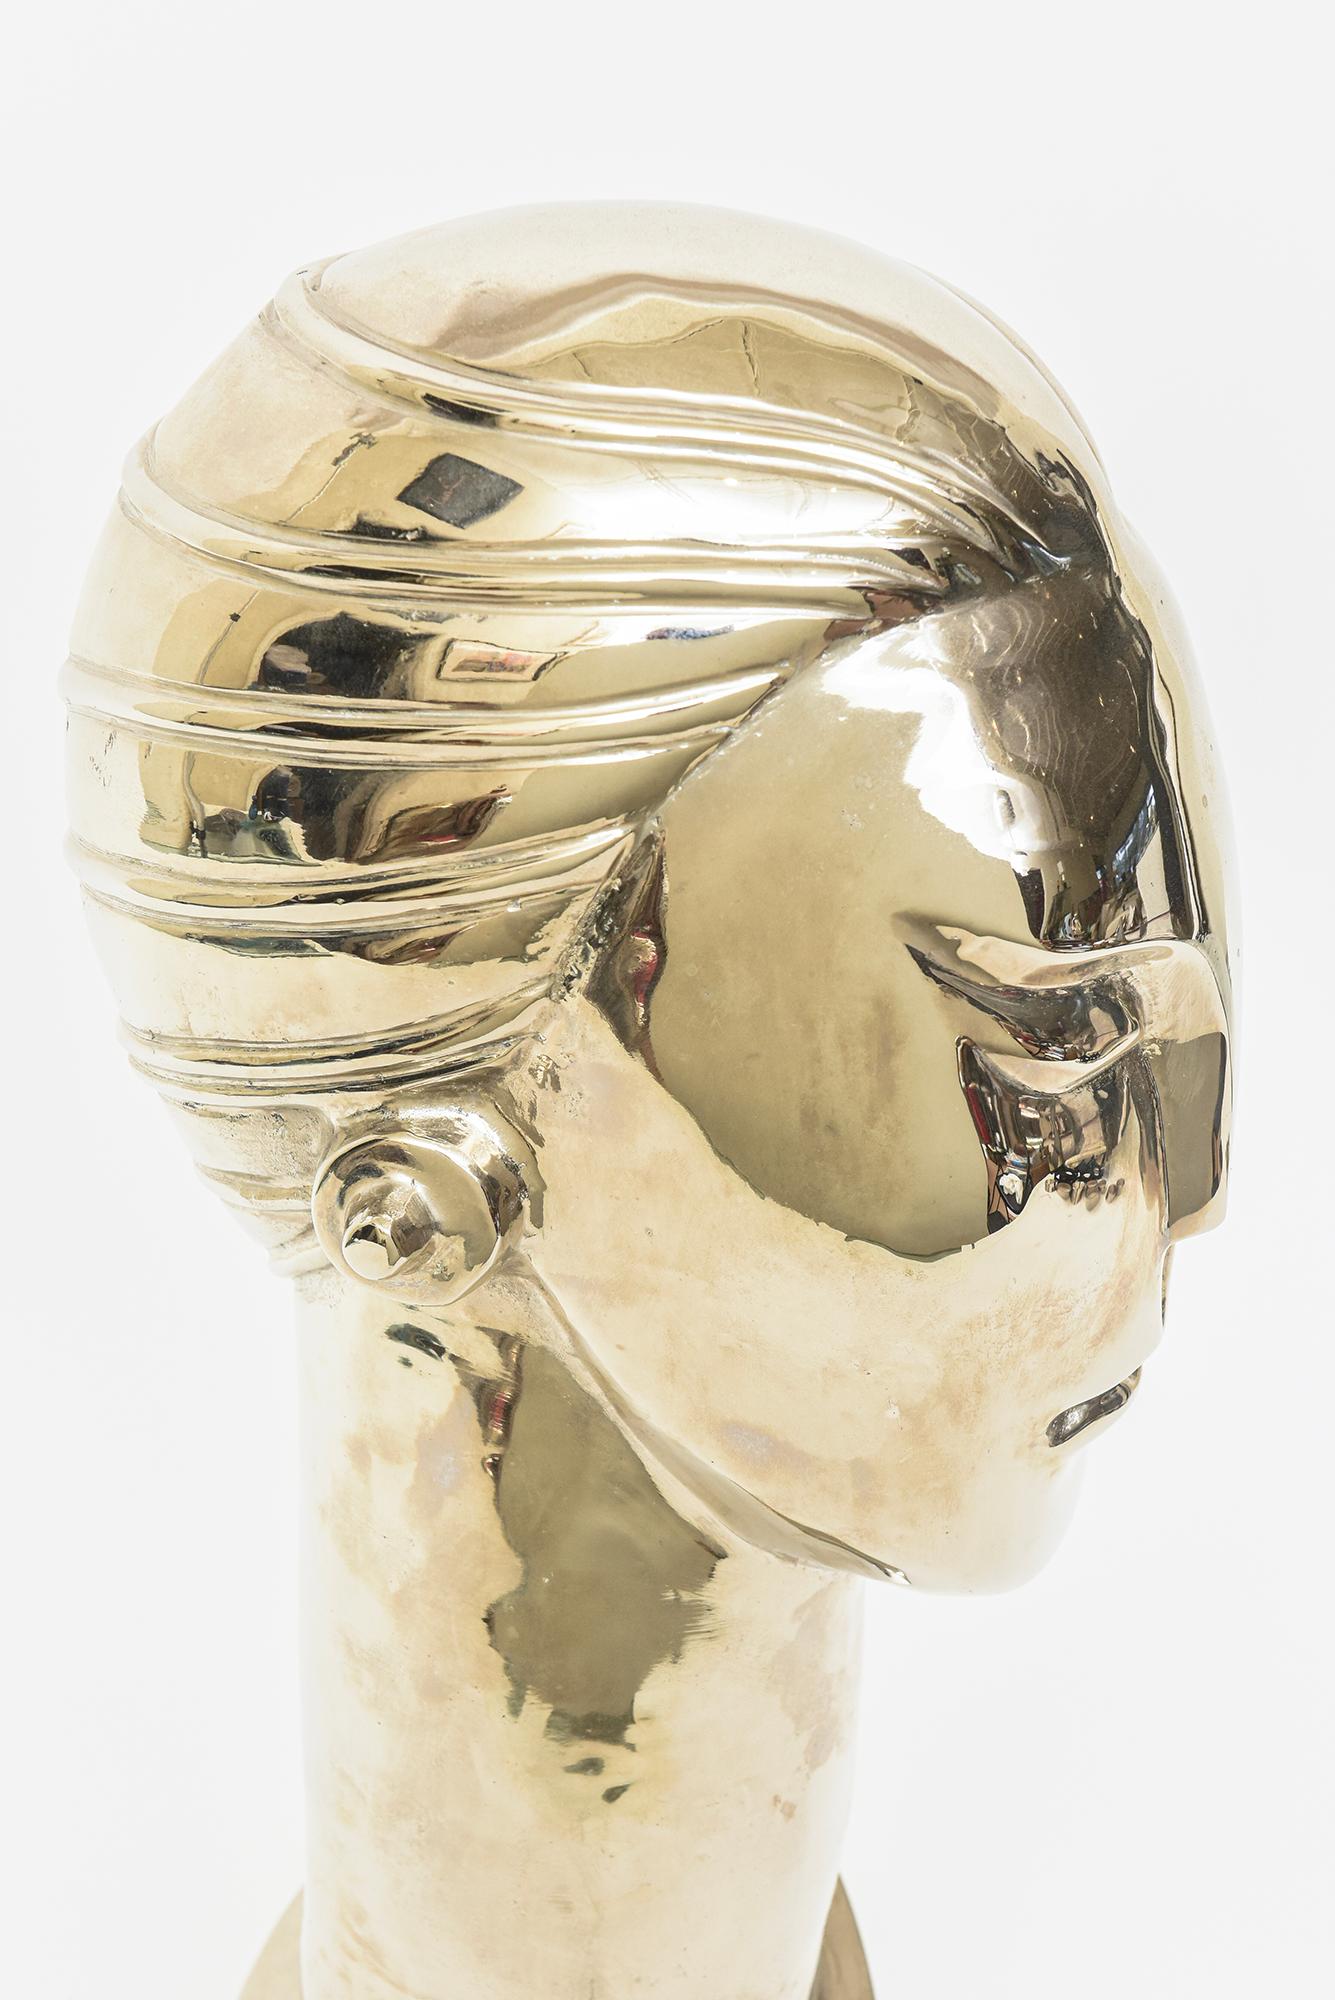 Nickel Silver Over Brass Art Deco Stylized Tall Head Bust Figurative Sculpture  For Sale 6